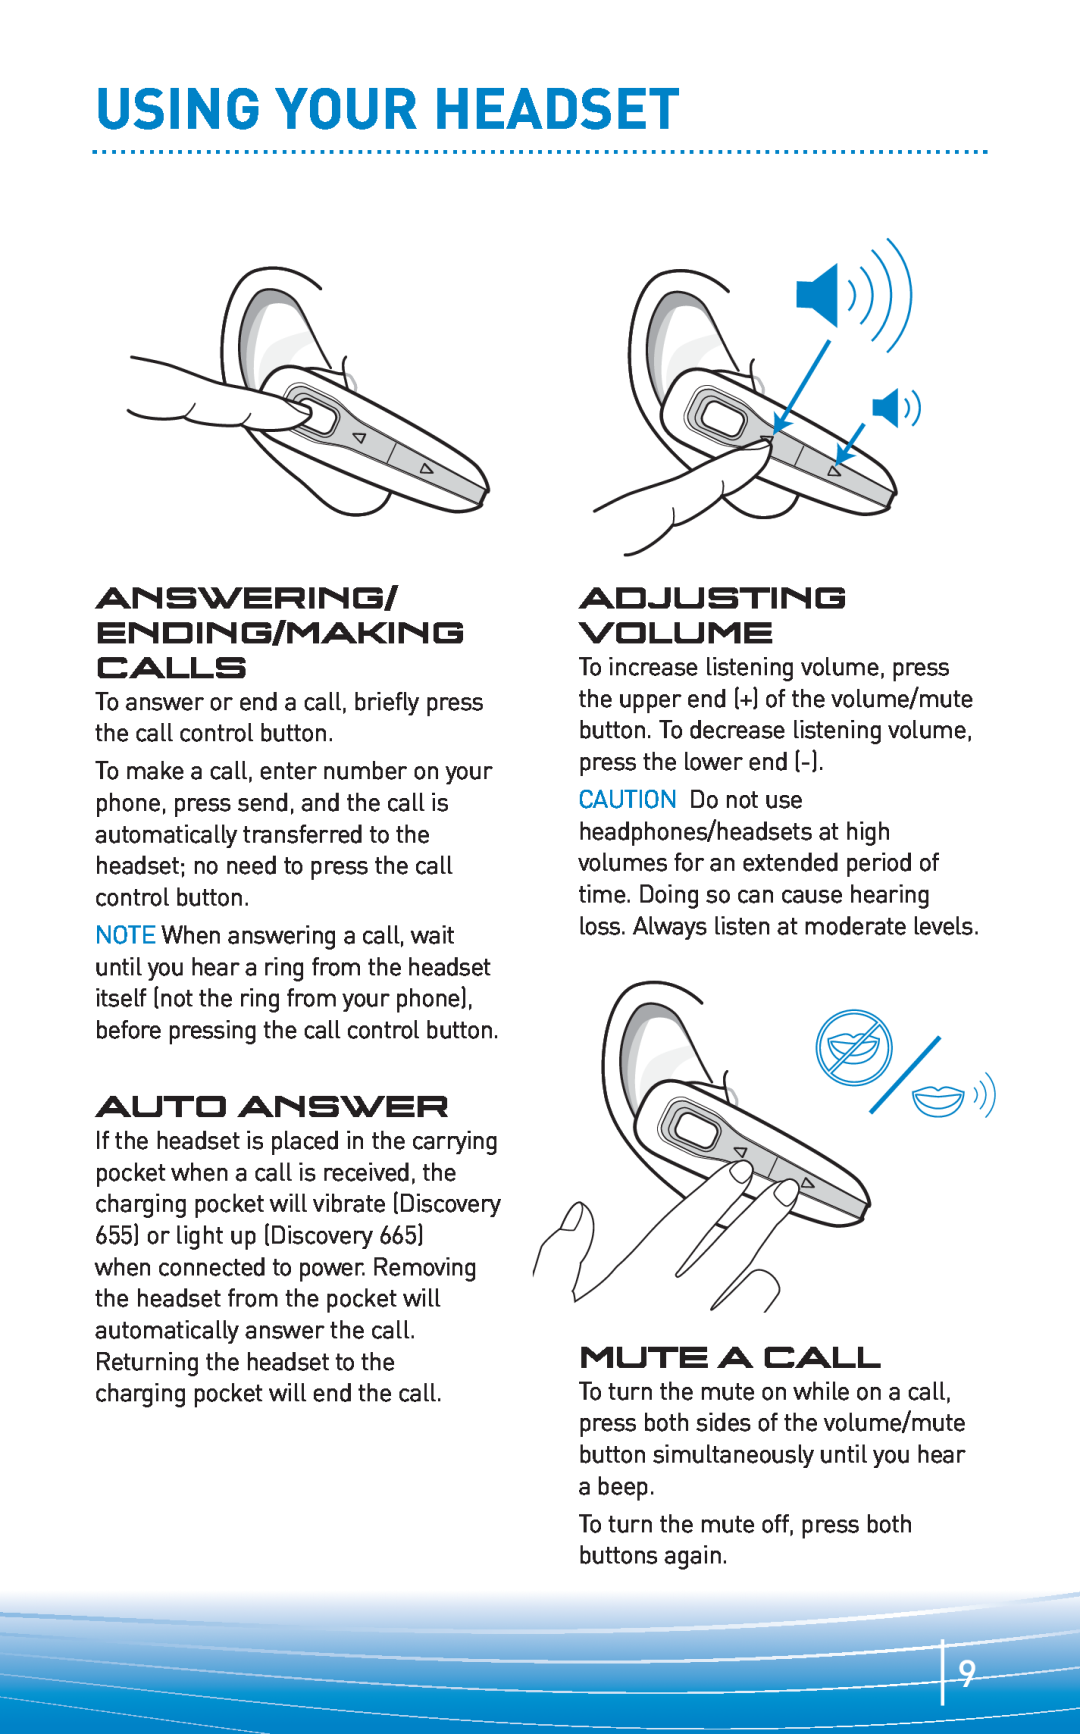 Plantronics none manual Using Your Headset, Answering Ending/Making Calls, Auto Answer, Adjusting Volume, Muteacall 